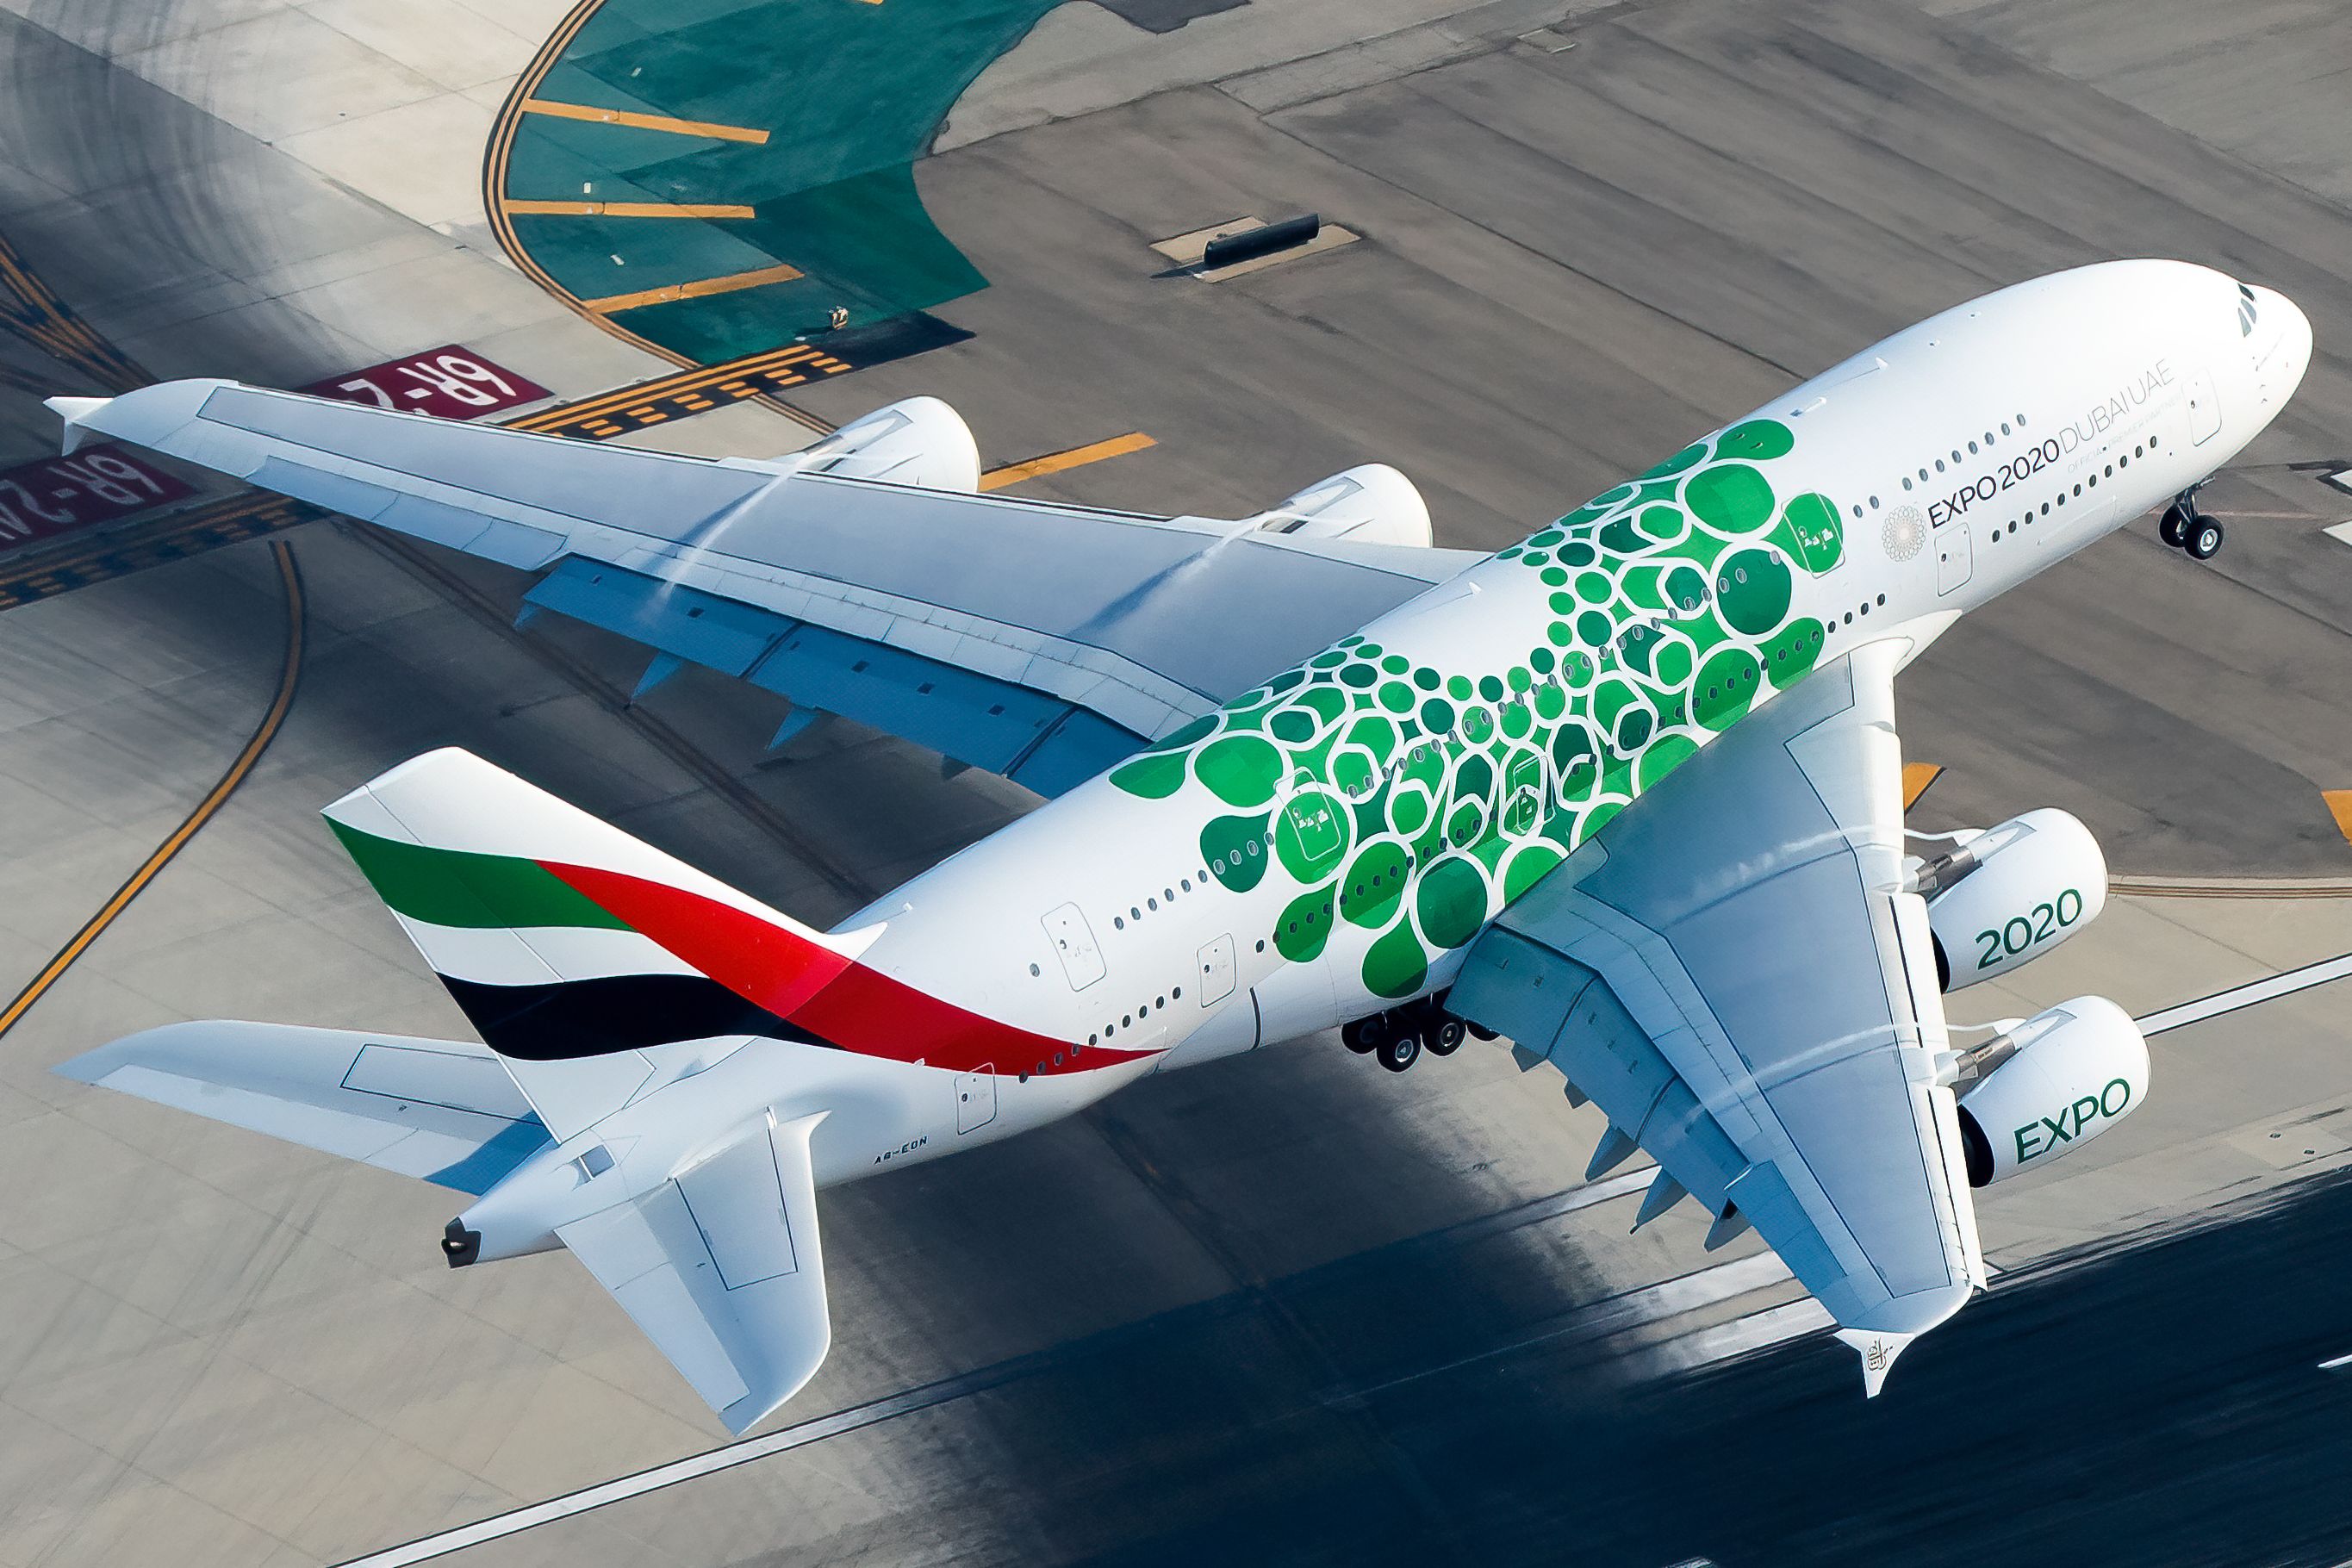 Emirates Launches Second Day by day Service To Cape City